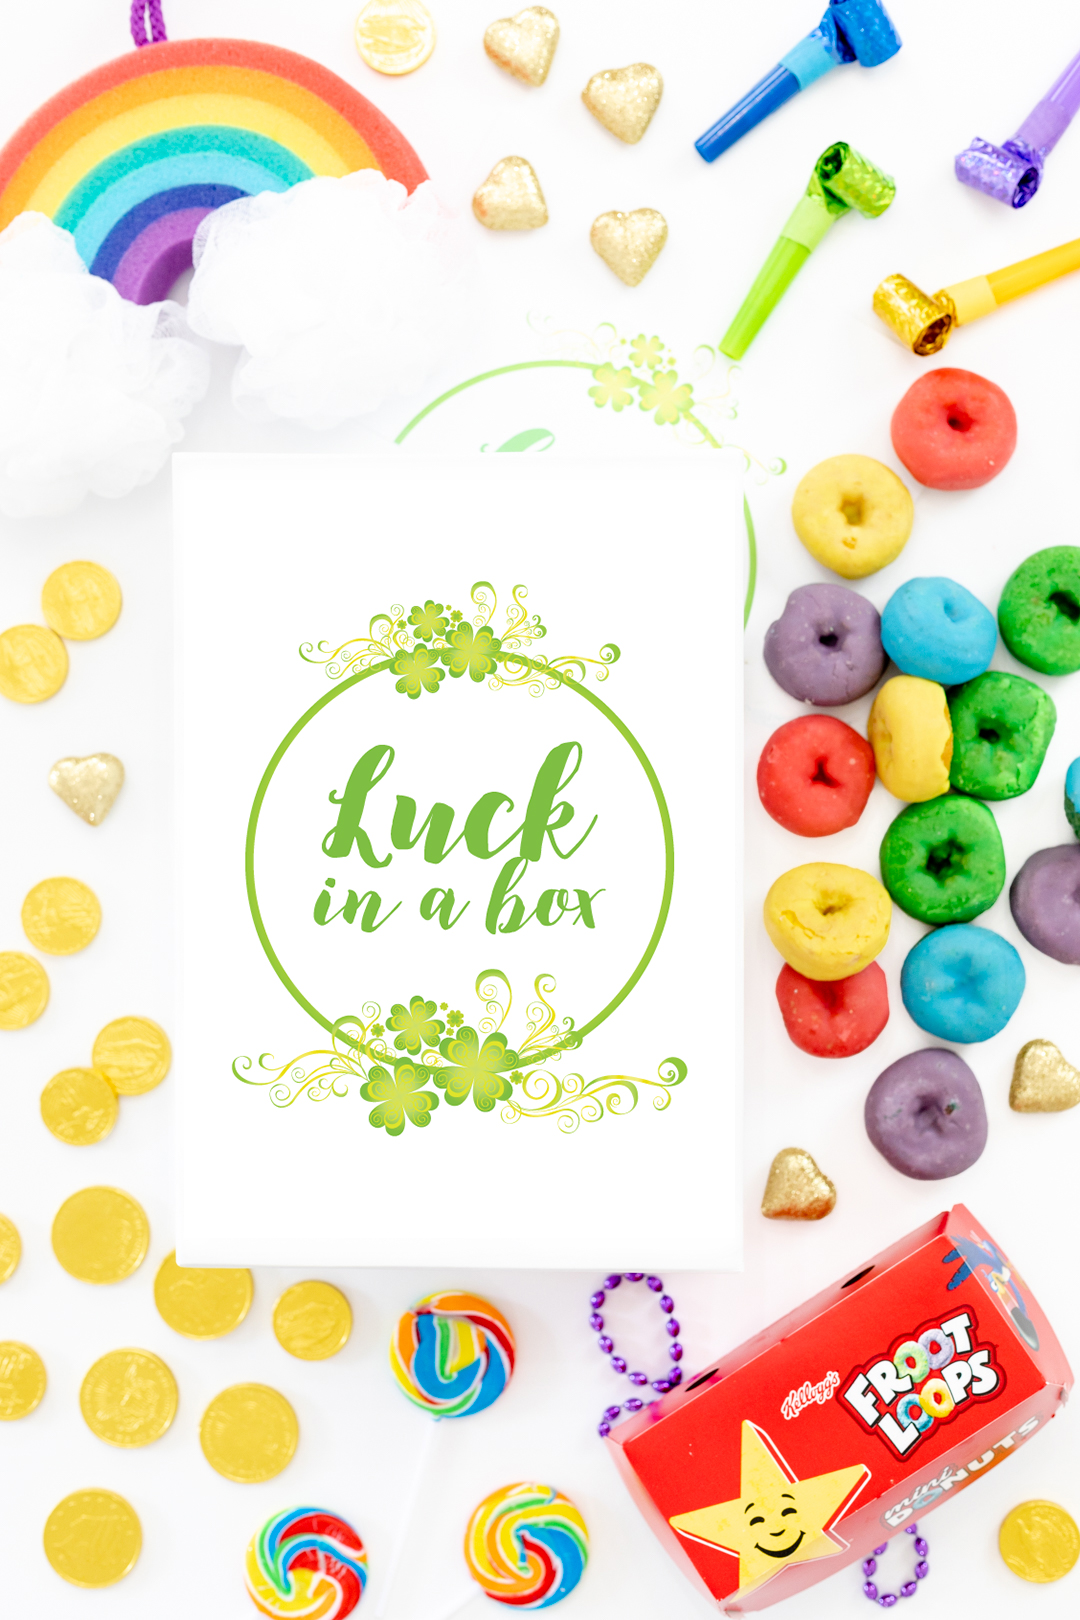 luck in a box diy gift idea for st. patrick's day